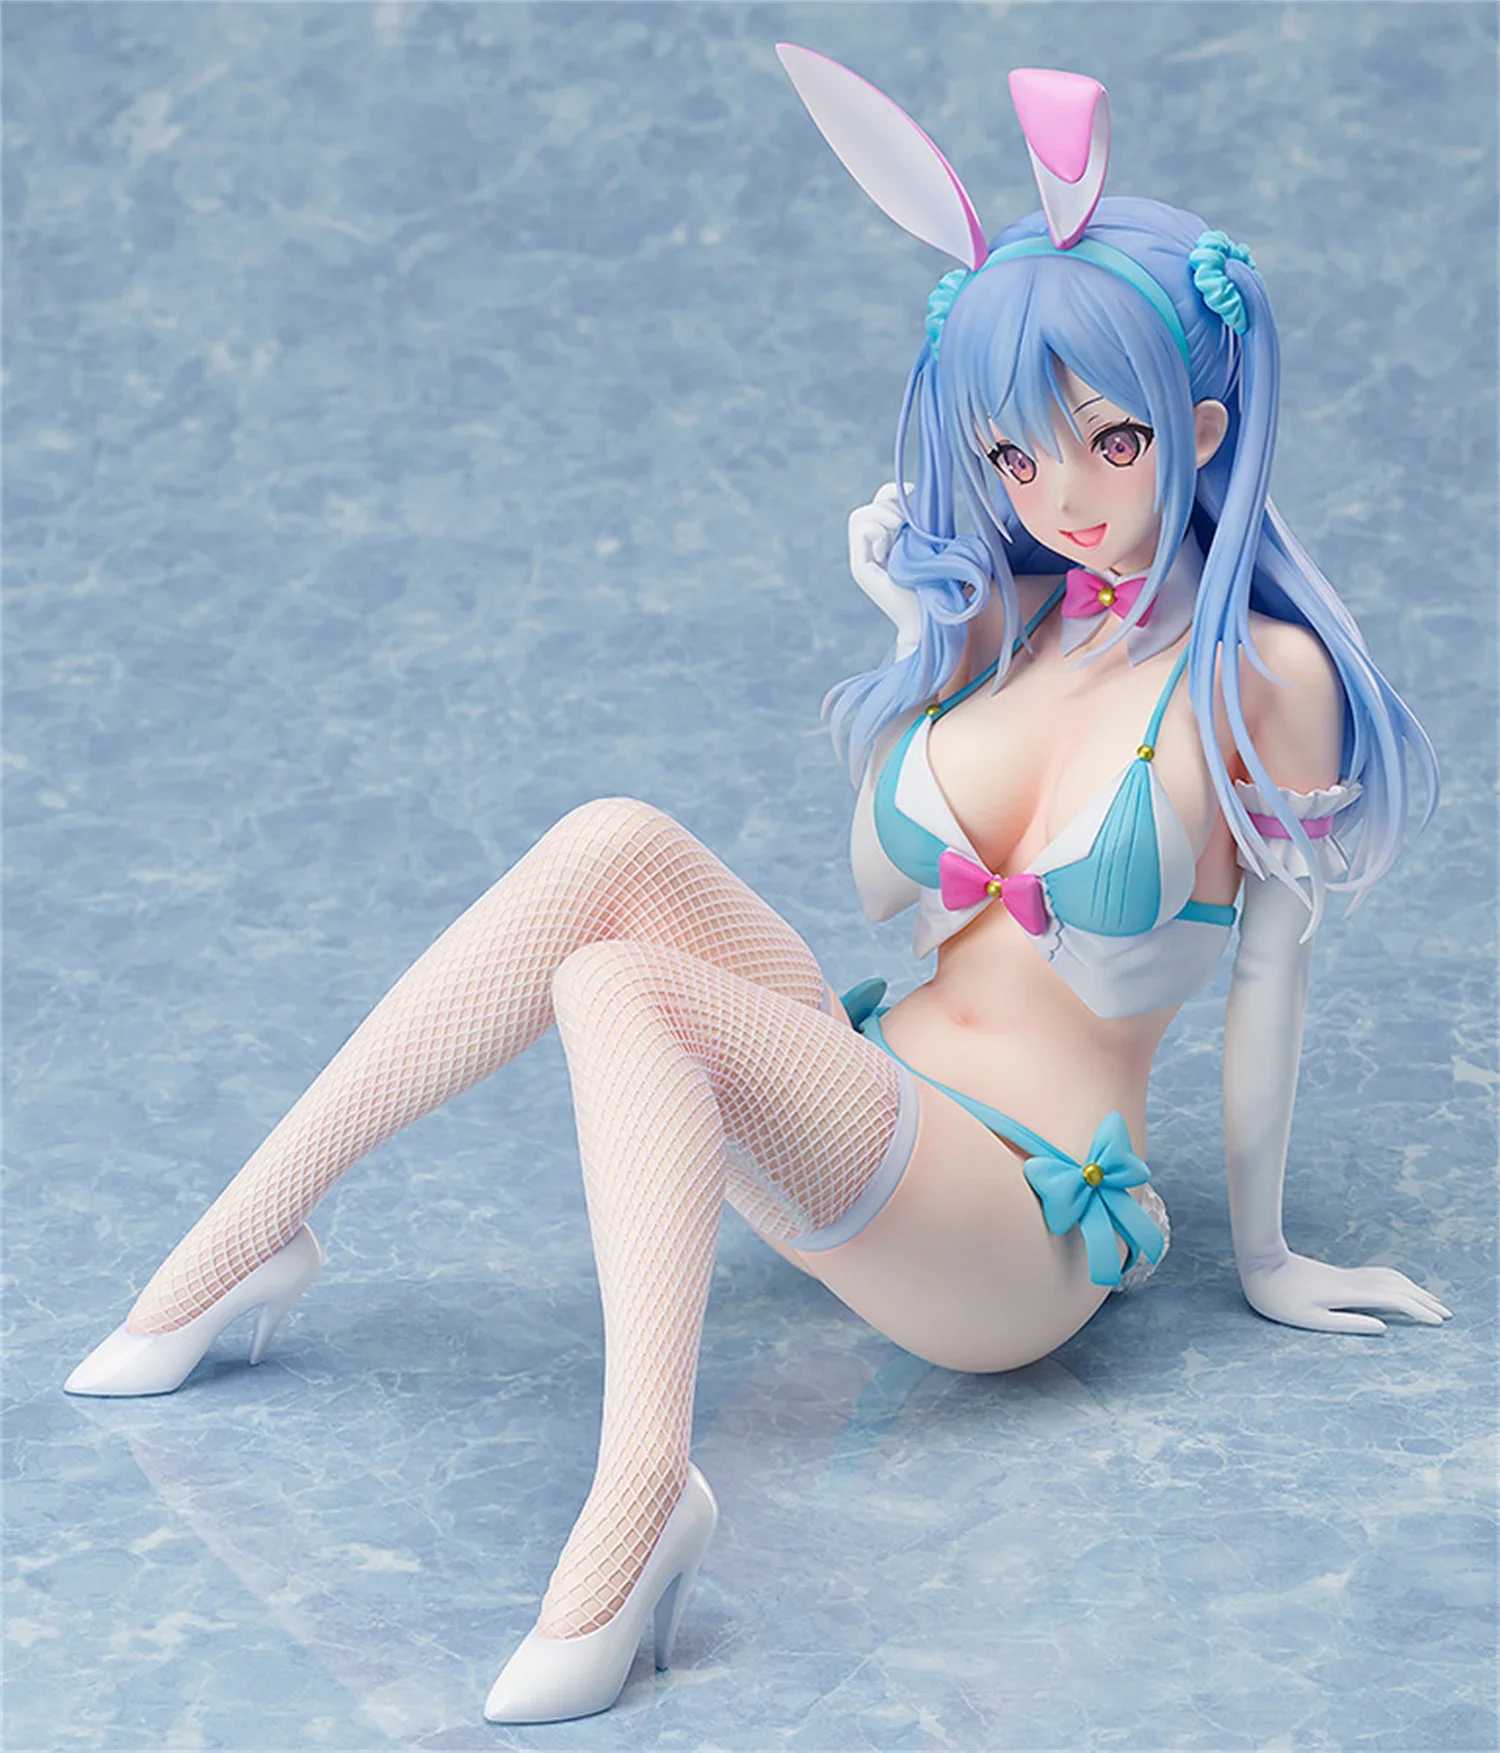 Action Action Toy Toy Agunities 20cm Native Kozuki Erina PVC Cute Sexy Dexy Nude Bunny Girl Figure Toy Hentai Model Dolls Collection Friends Gift Y24042592E3